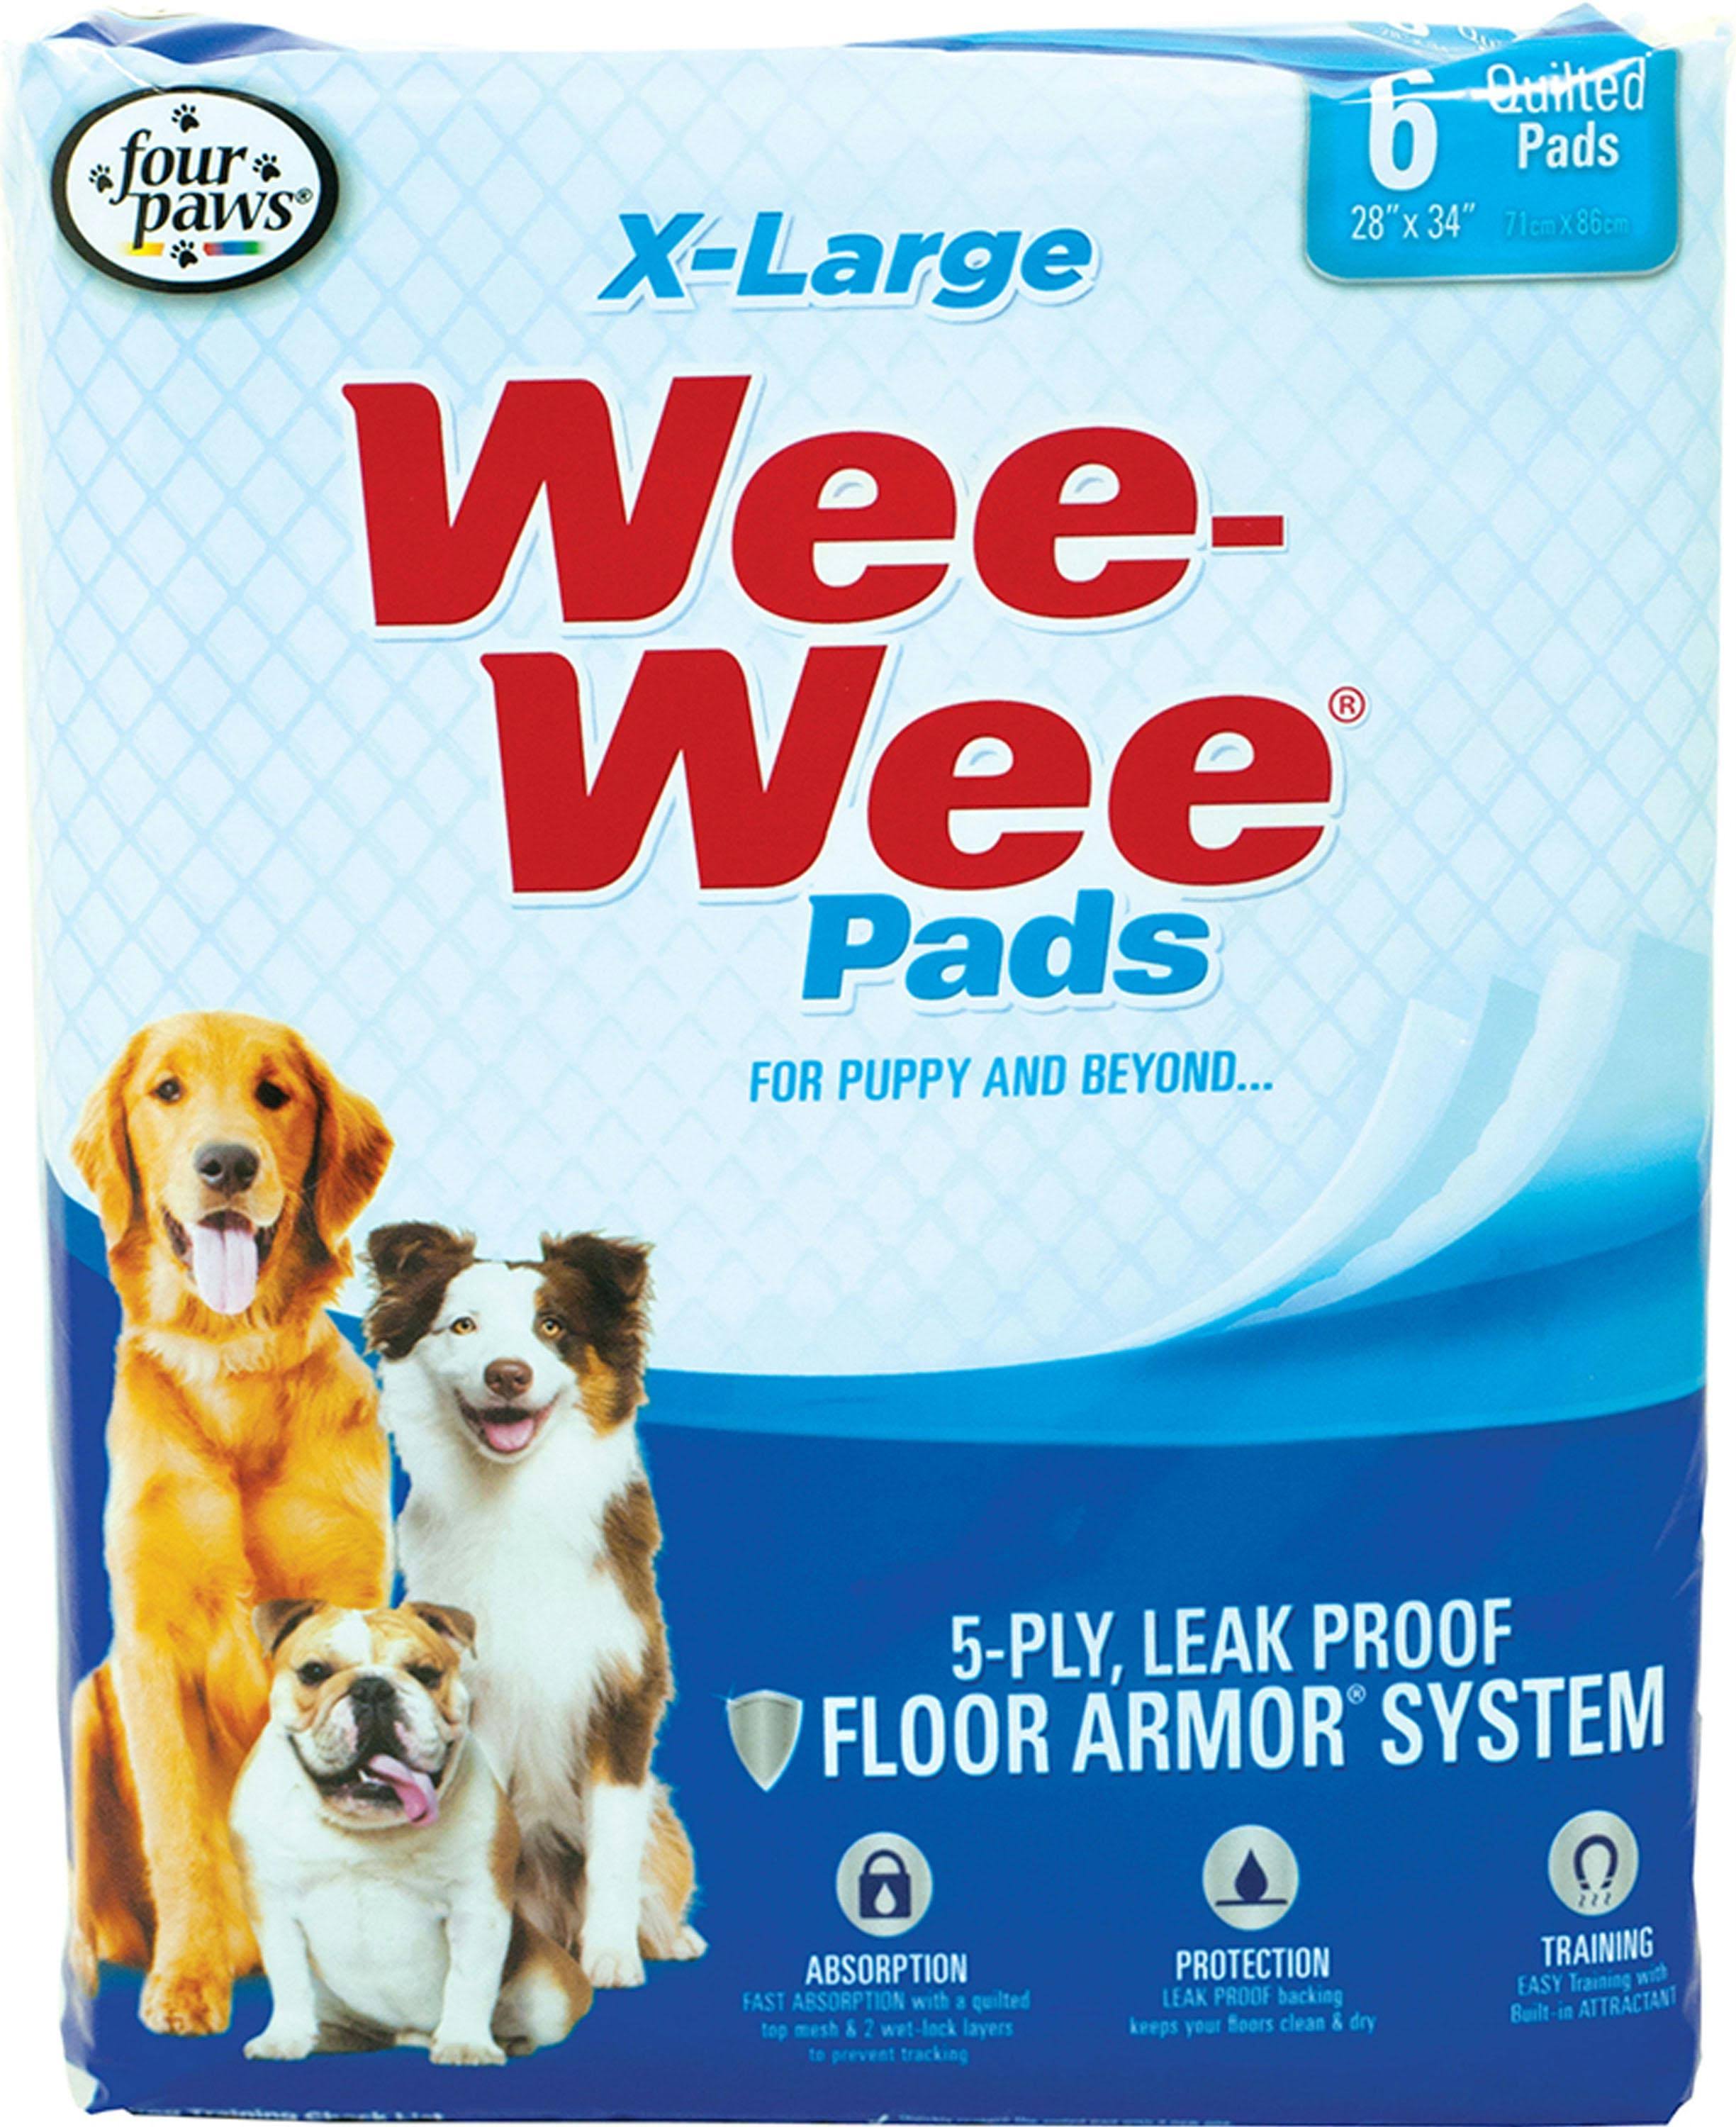 Four Paws WEE-WEE Pads - X-Large Pad - 40 Pack